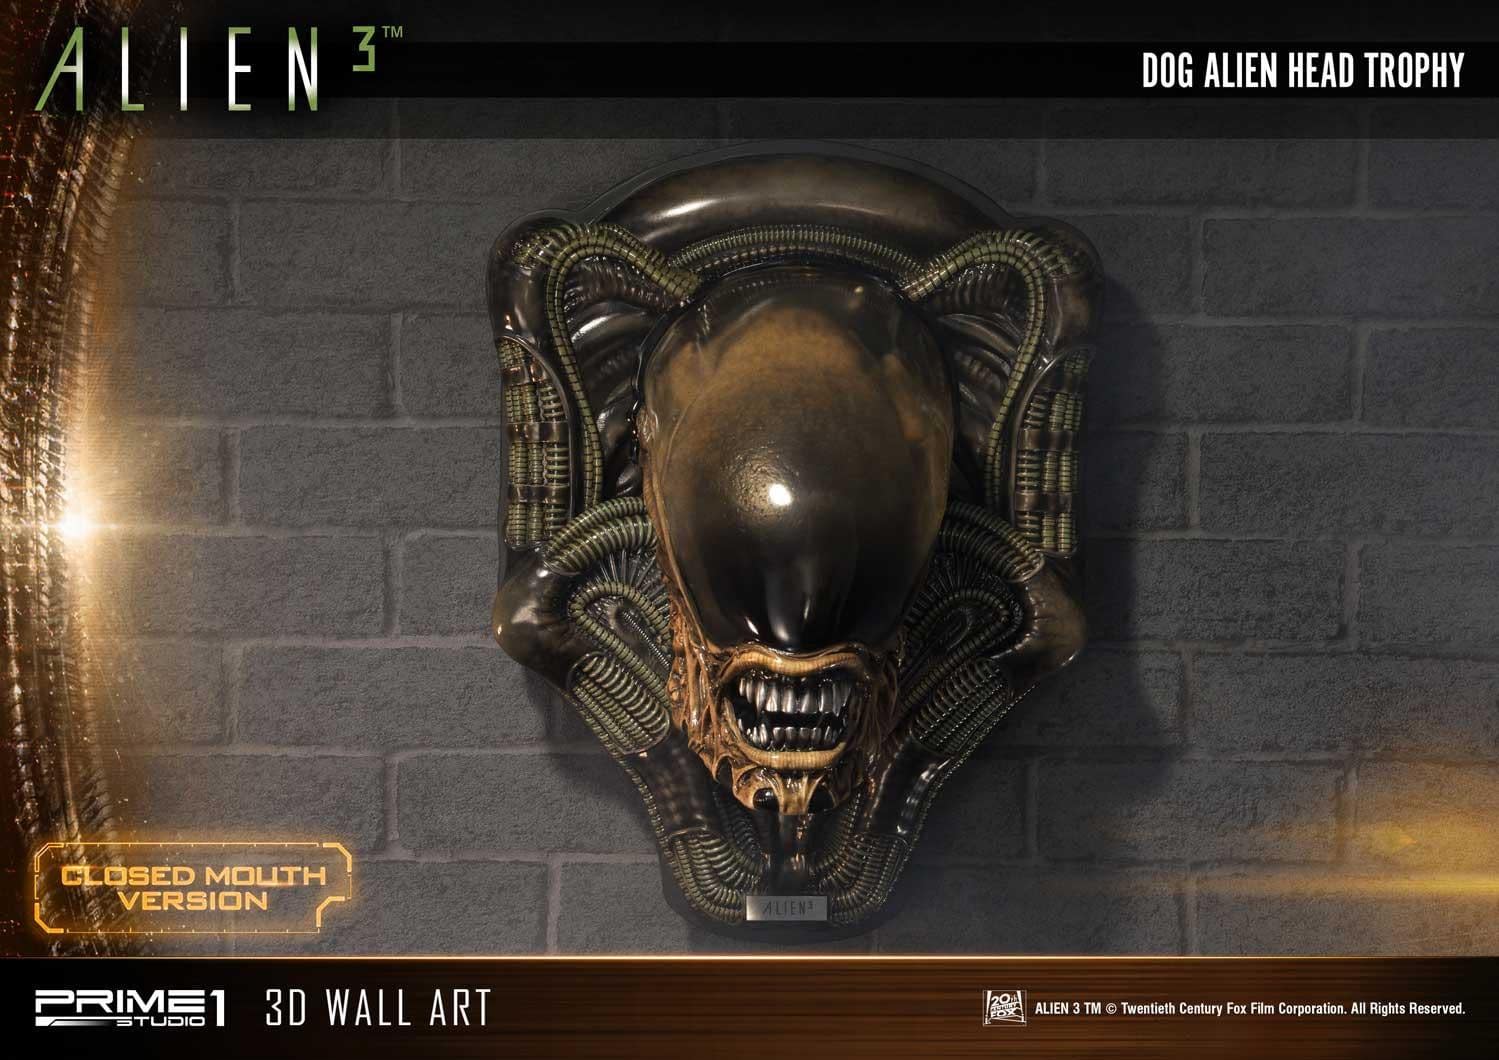 Alien 3 Dog Head Trophy Mounts Available from Prime 1 Studio